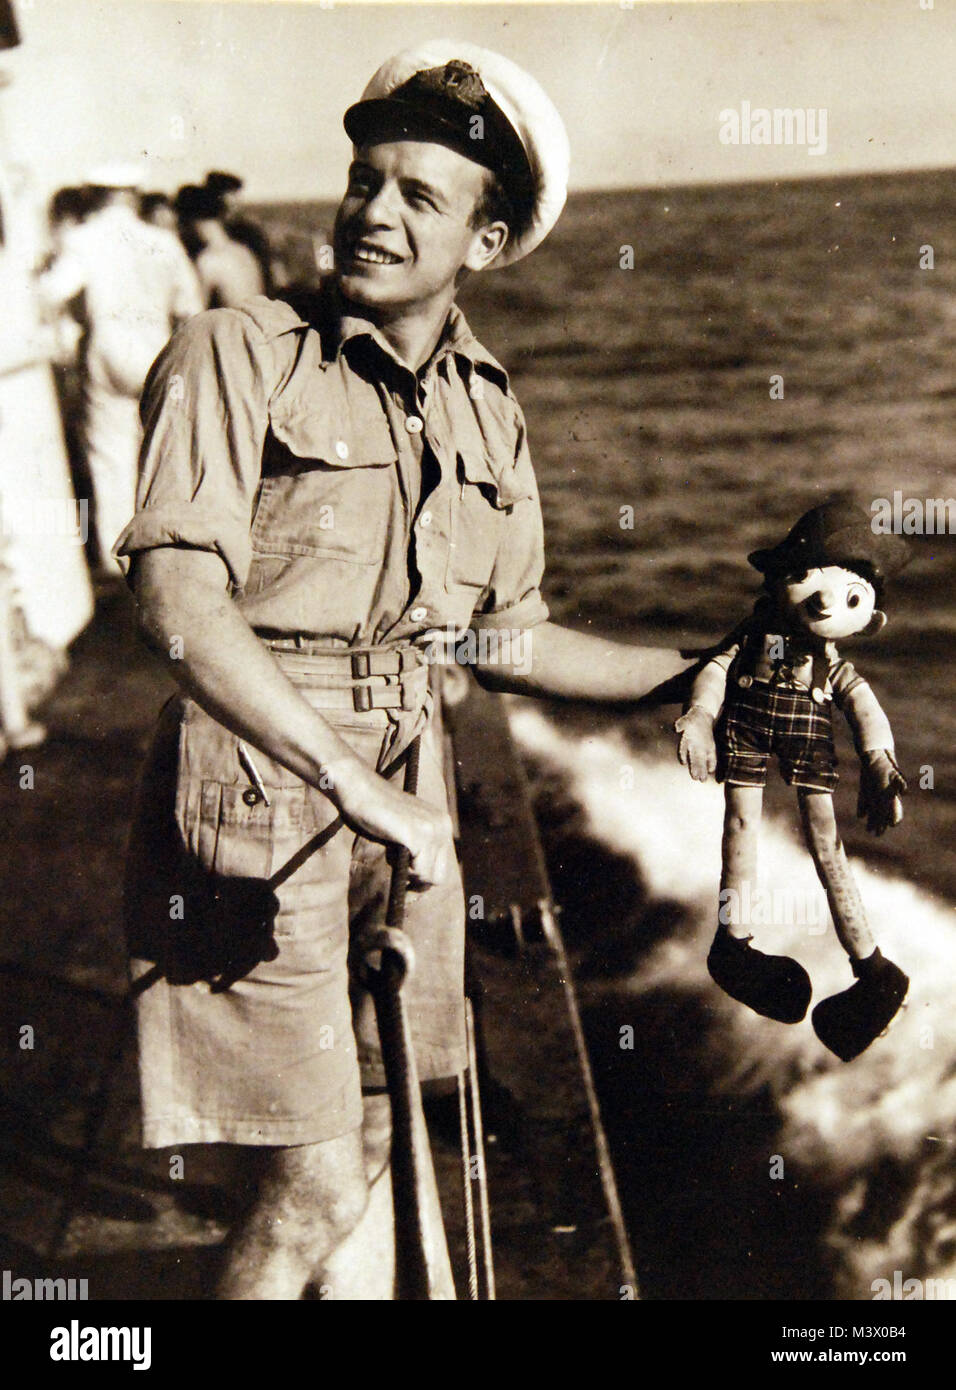 80-G-316324:  Lieutenant C. Murdock on destroyer of the Royal Navy (British) fleet with doll mascot “Wee Willie”.   Photograph received April 24, 1945.  Official U.S. Navy Photograph, now in the collections of the National Archives.  (2018/01/31). 80-G-316324 26136262838 o Stock Photo